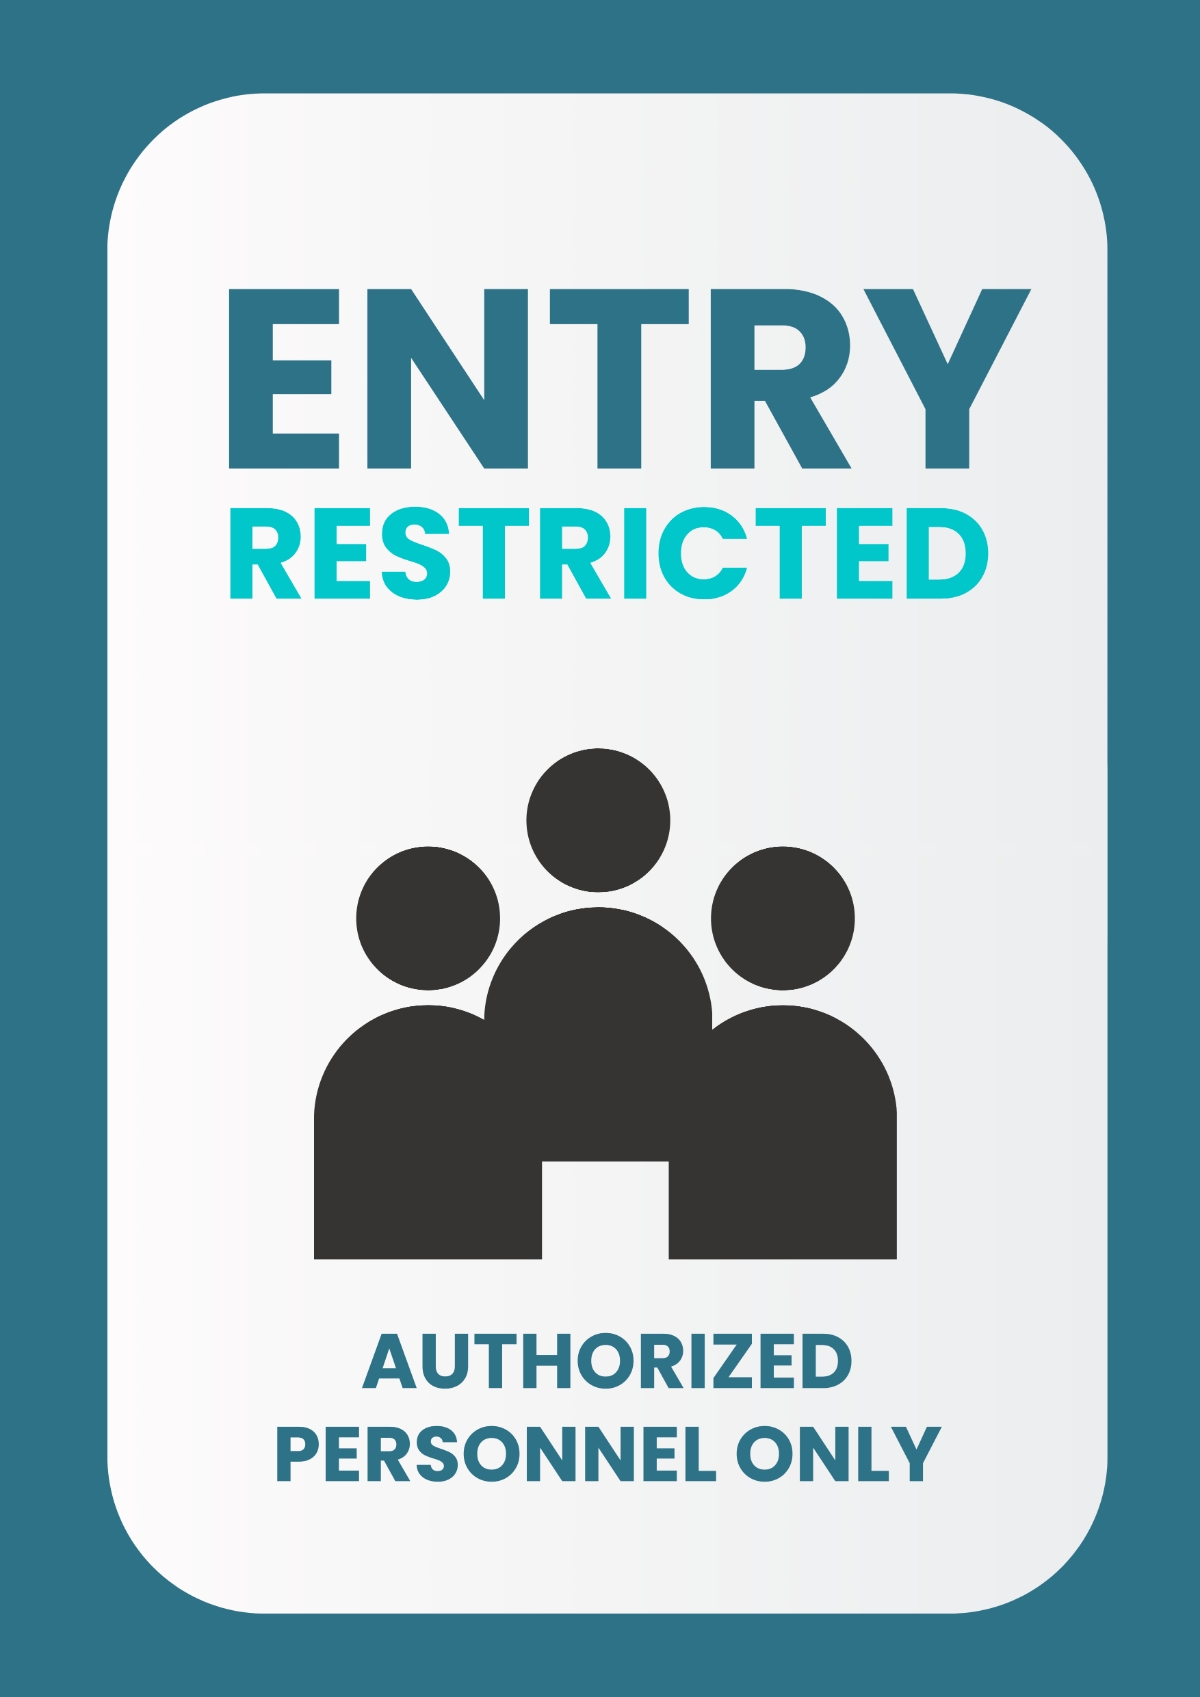 Authorized Personnel Only Cleaning Services Area Sign Template